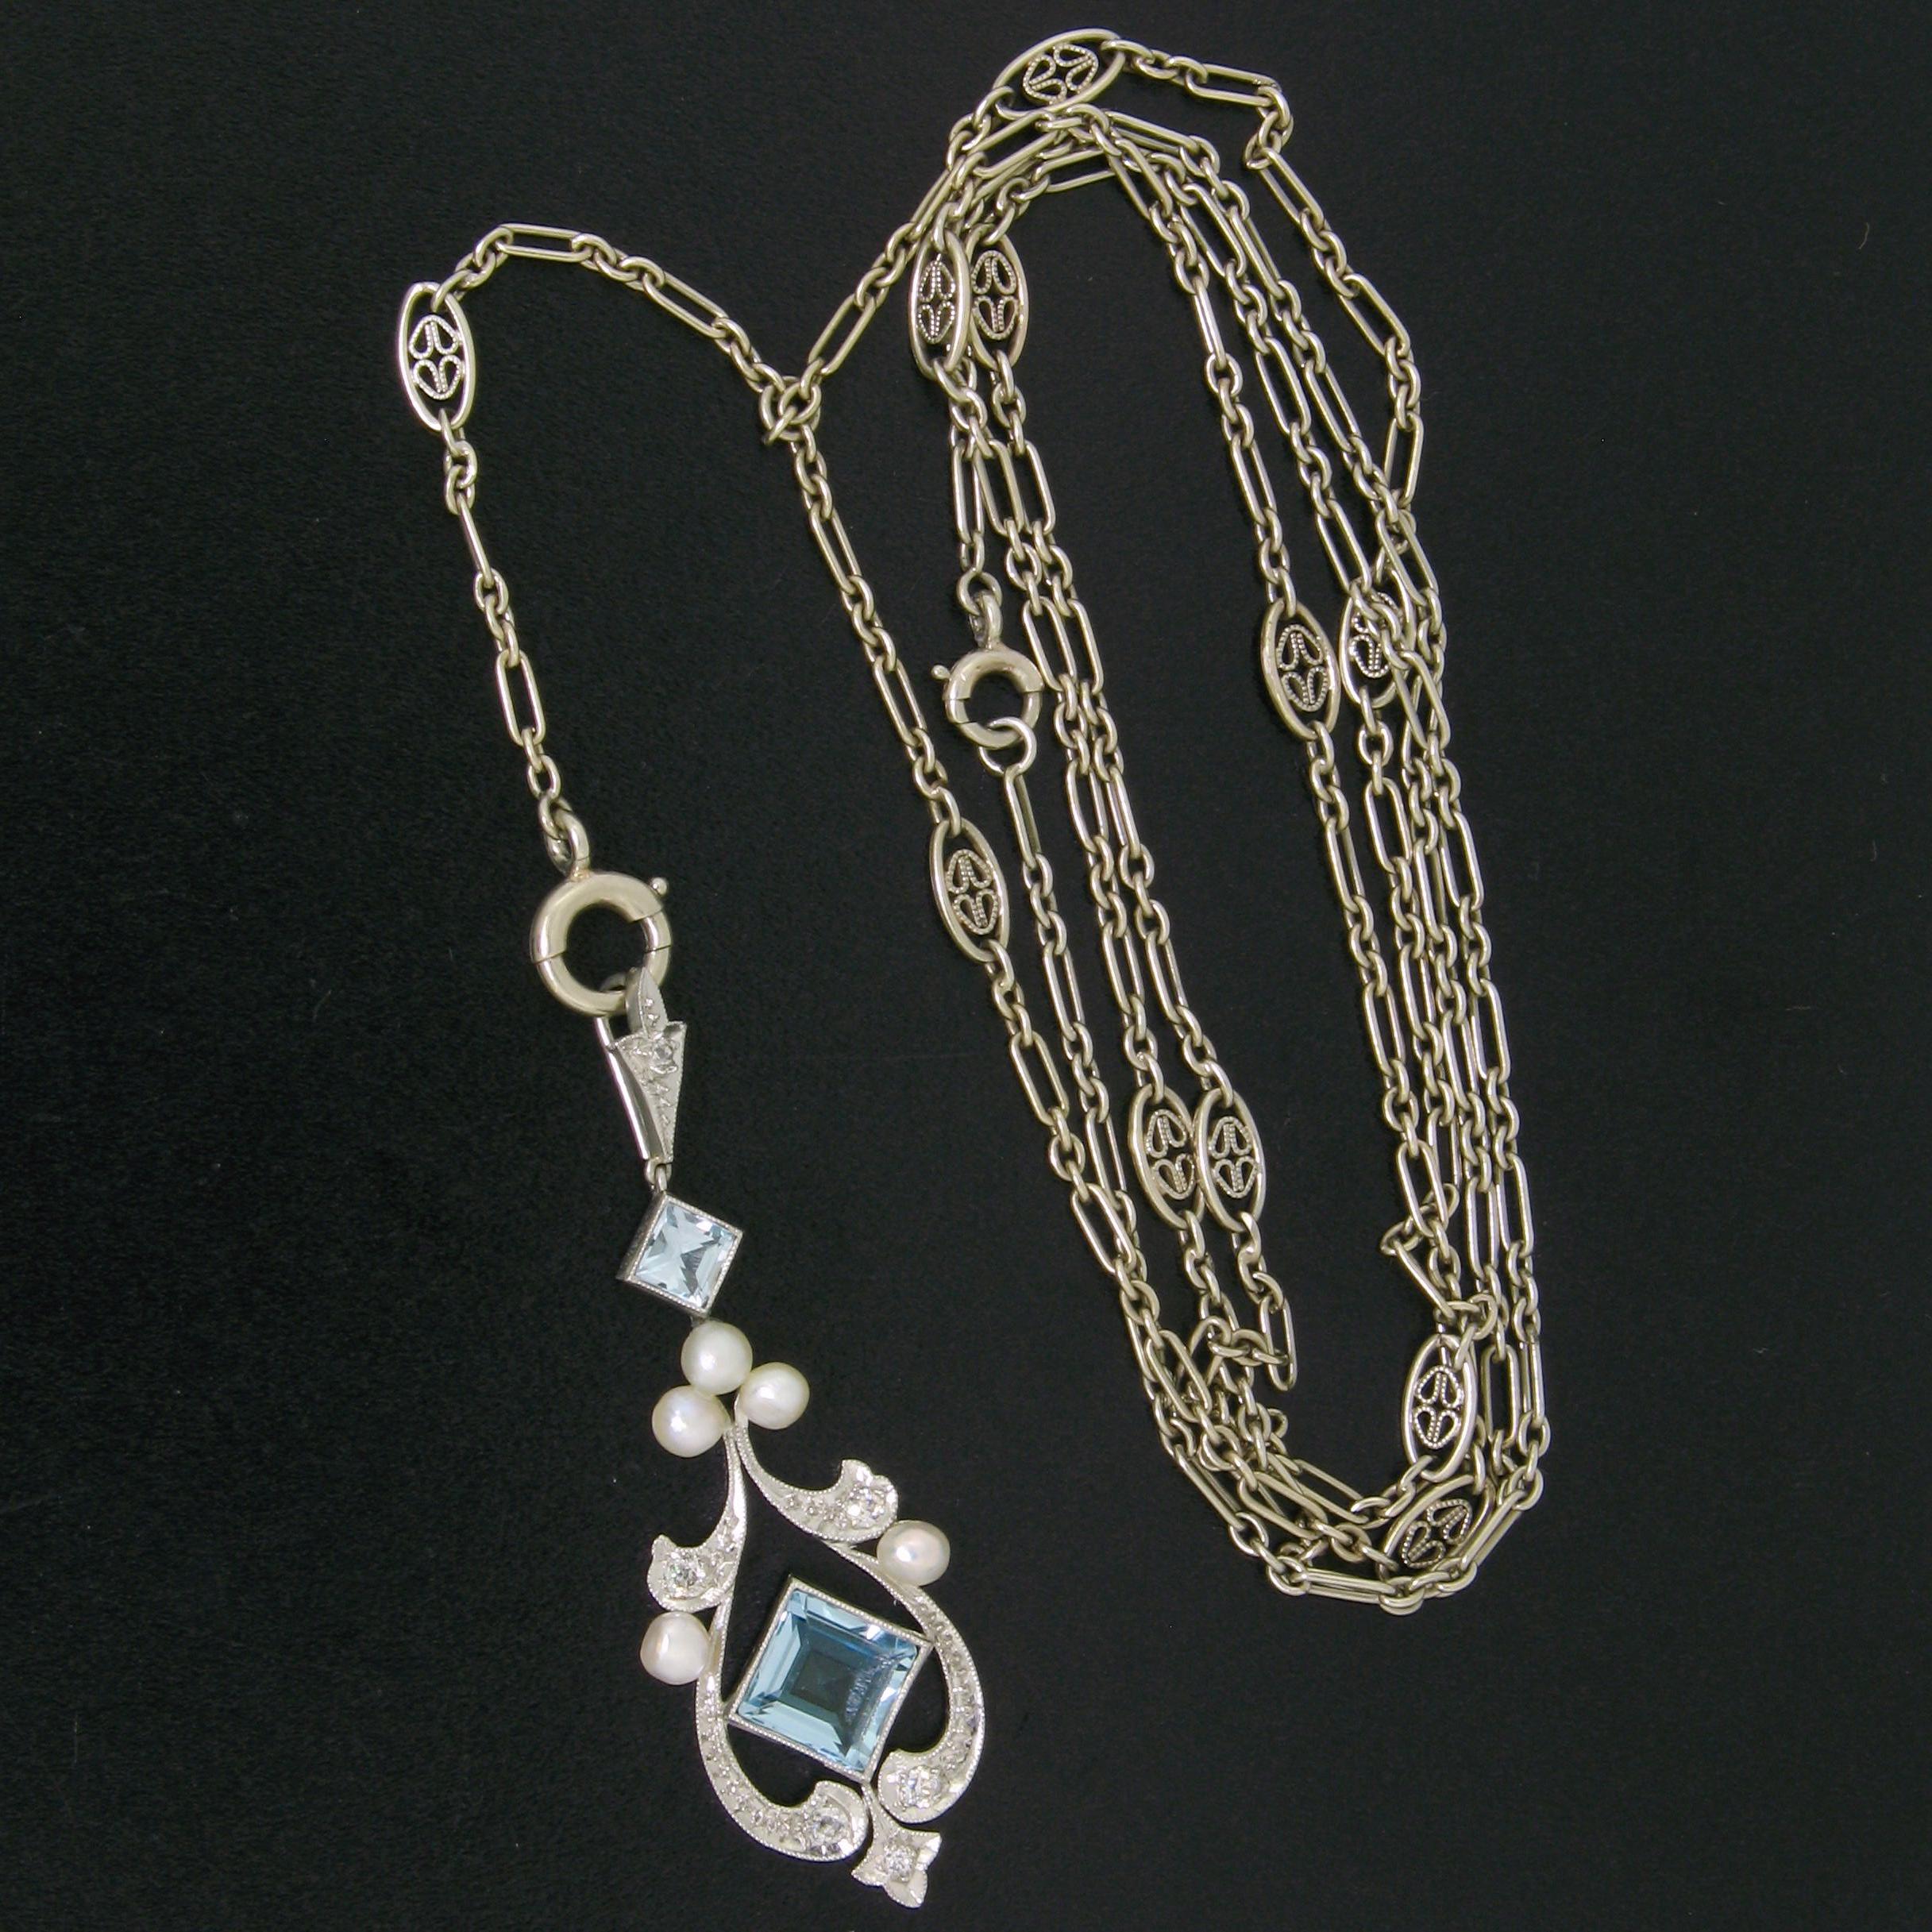 Here we have a very rare antique necklace and pendant crafted during the art deco period. The chain is crafted in solid 14k white gold and the pendant is crafted in solid .900 platinum. The 27.5 inch chain features a very simple and gorgeous design